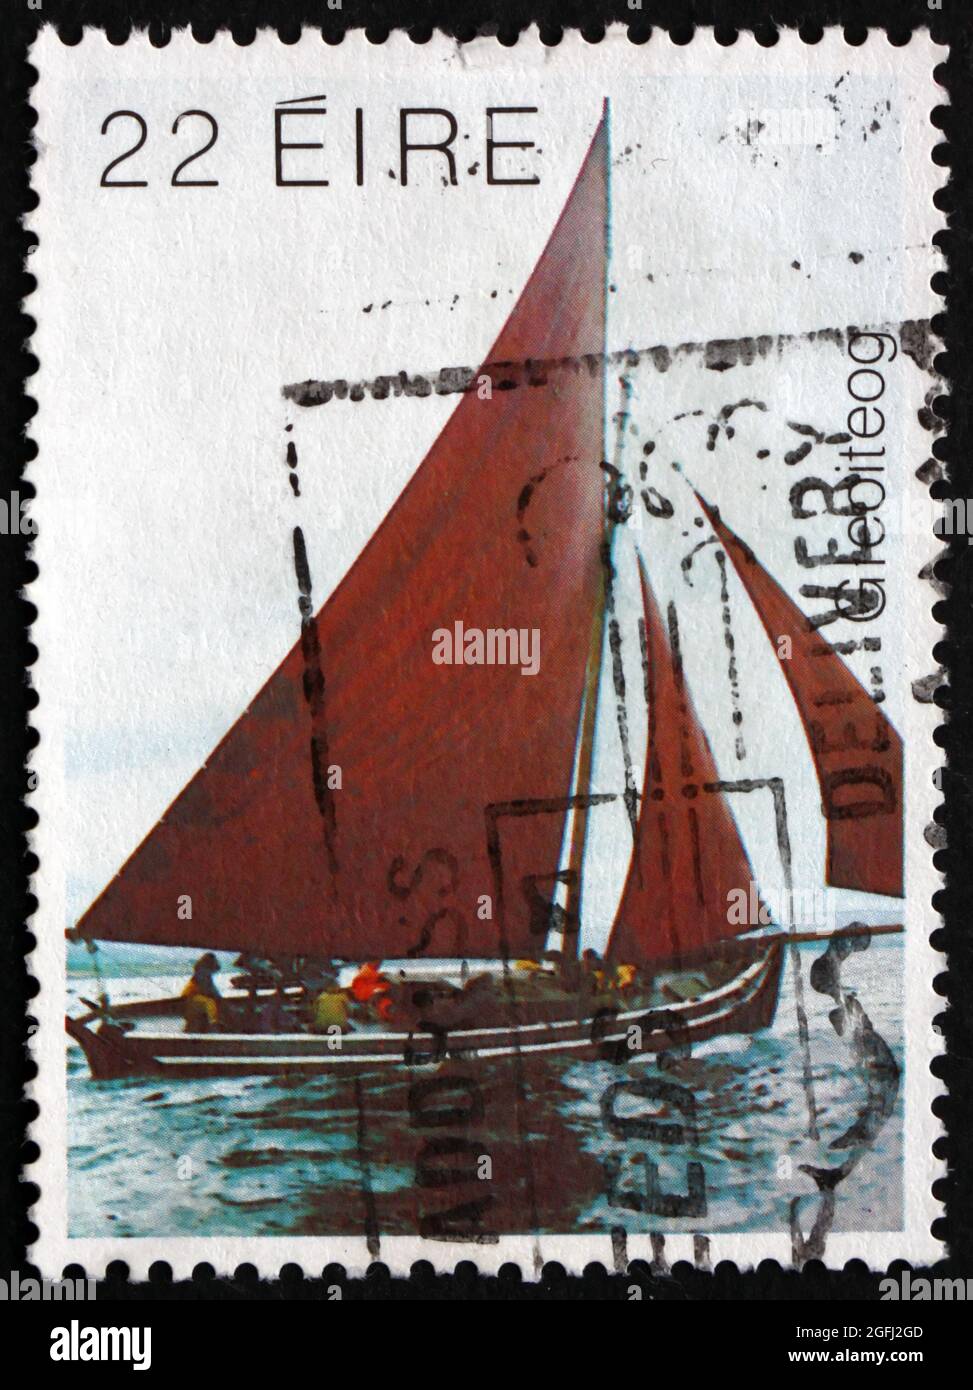 IRELAND - CIRCA 1982: A stamp printed in Ireland shows Galway Hooker, Traditional Fishing Boat Used in Galway Bay off the West Coast of Ireland, circa Stock Photo